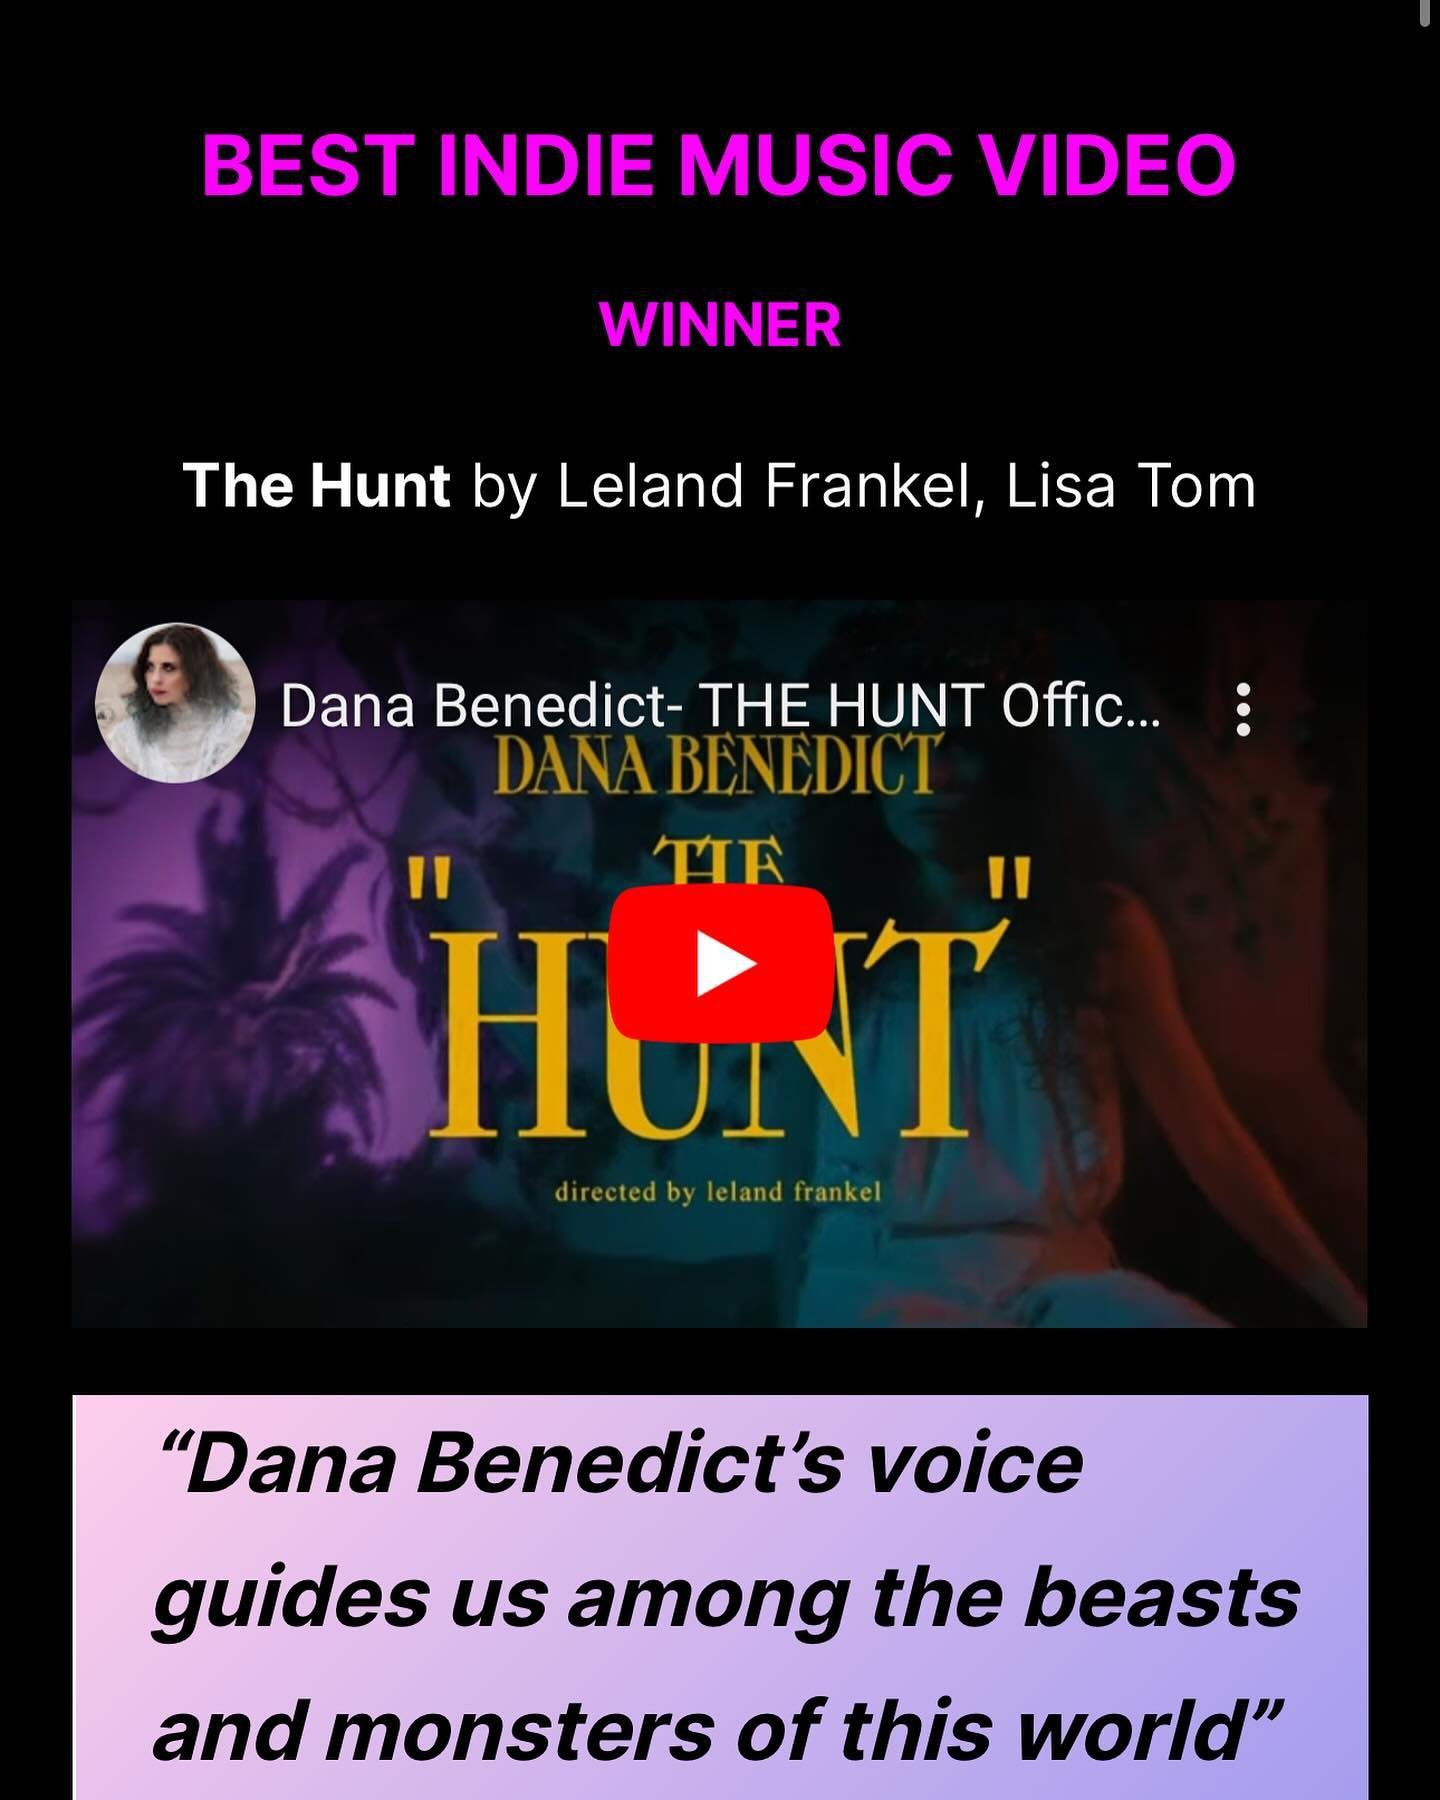 A year later and THE HUNT is getting some recognition! If you&rsquo;ve yet to see it, music video and lyric music video are both on YouTube! So proud of this little music video 🦌Join The Hunt 

🦌🏹🥀 full video link in bio, lyric video by @xoxocafe